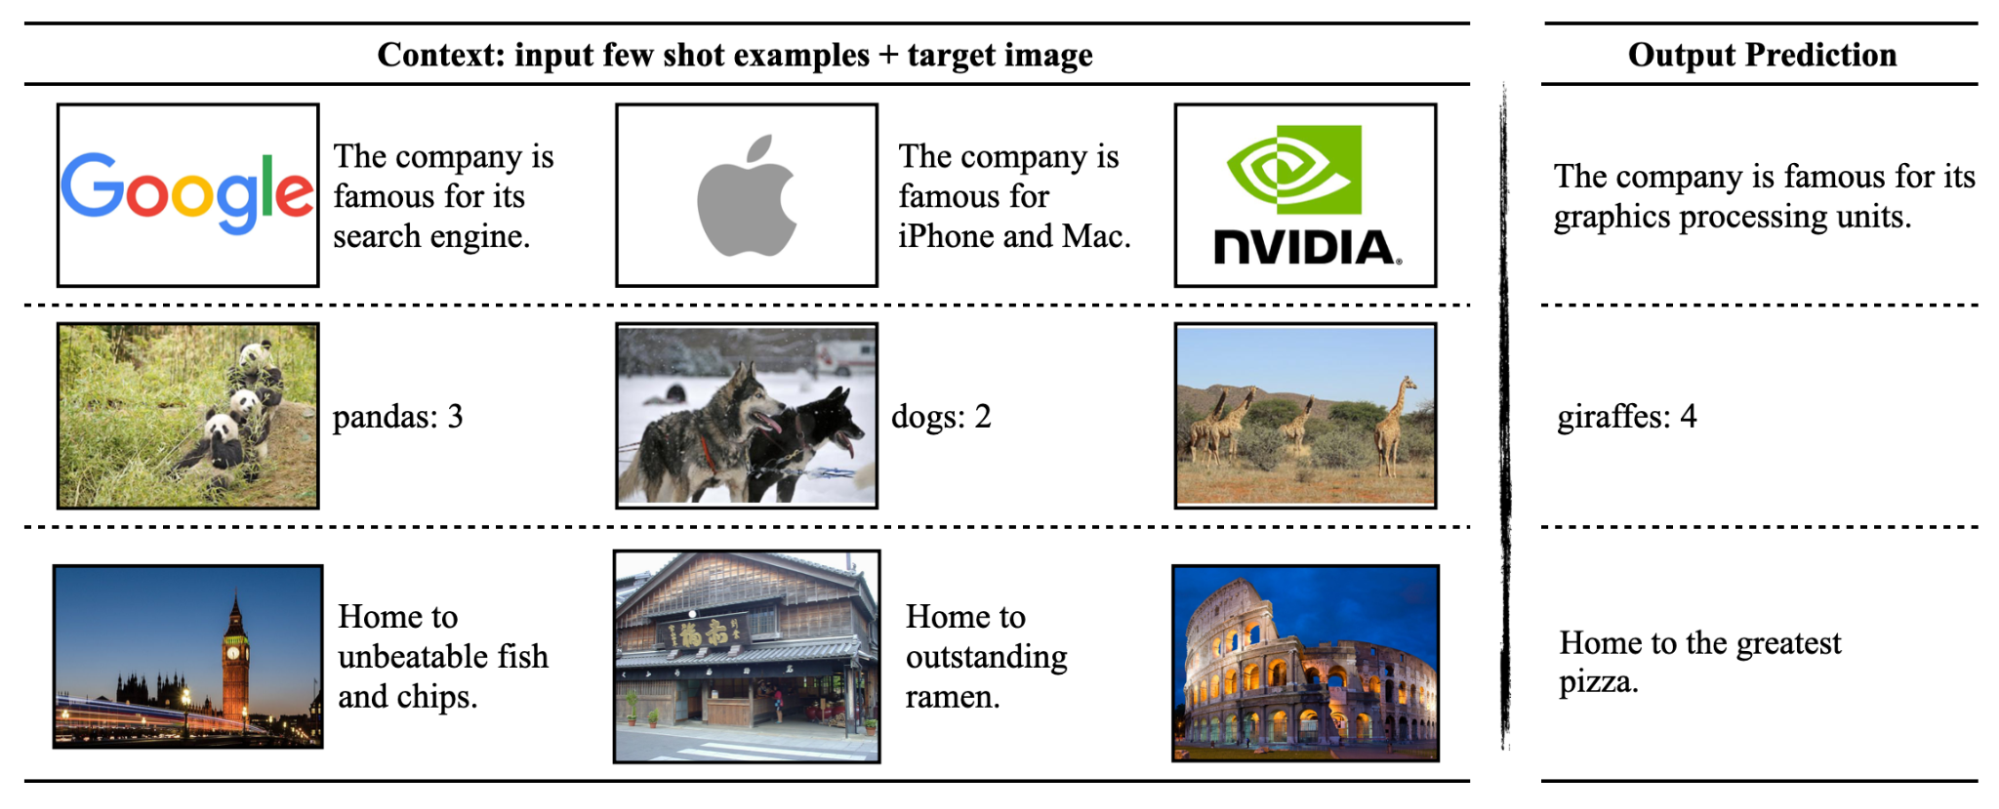 The image shows the VLM can providing answers from images given prior examples.